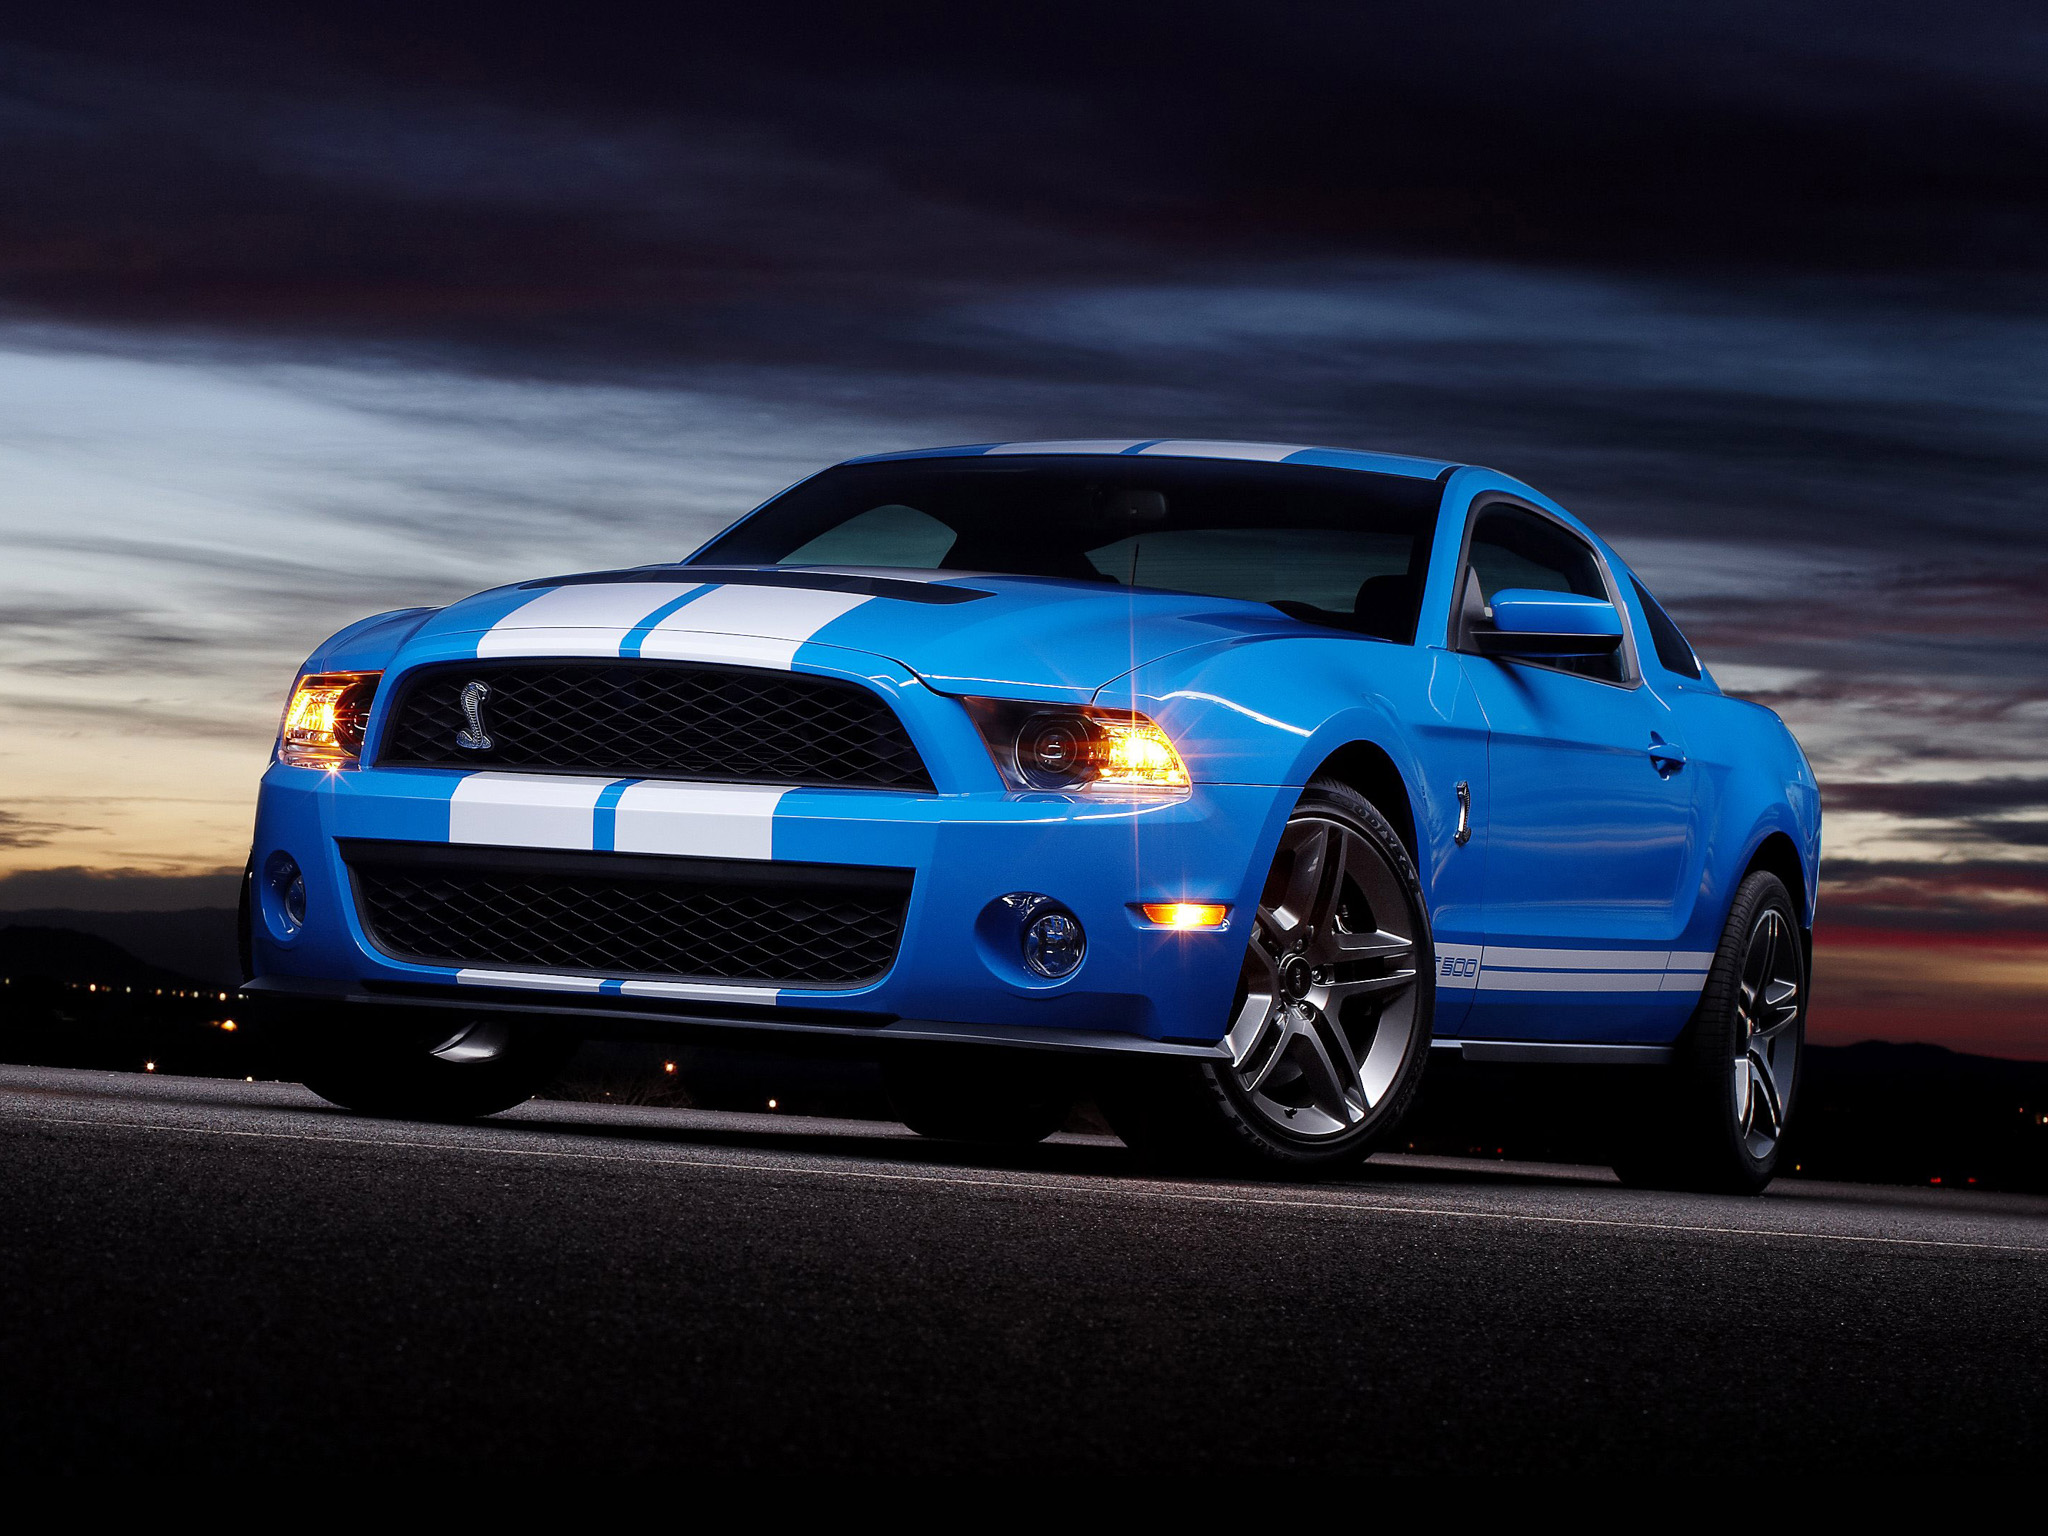 2009, Shelby, Gt500, Ford, Mustang, Muscle, Gw Wallpaper